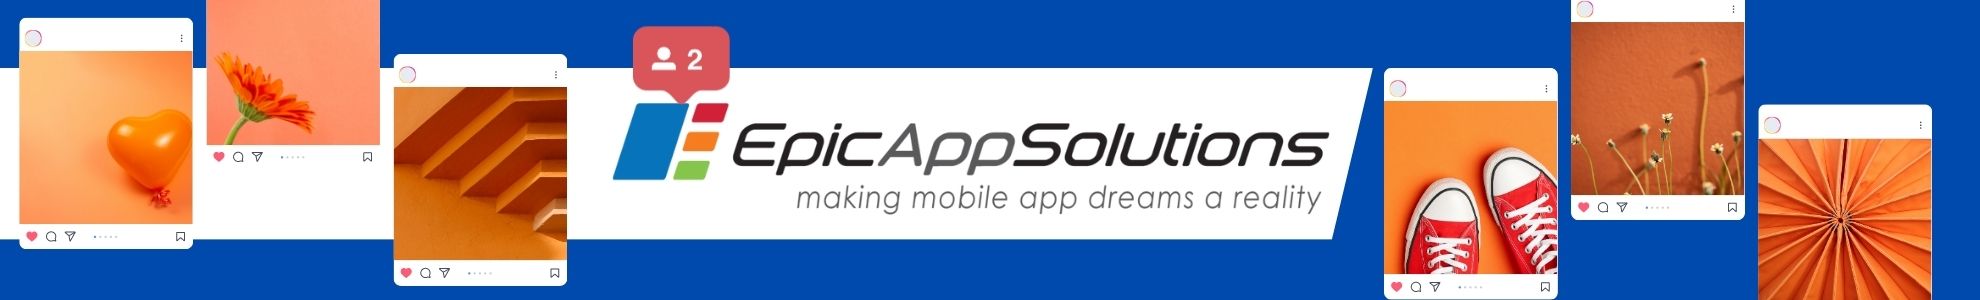 Epic App Solutions Video